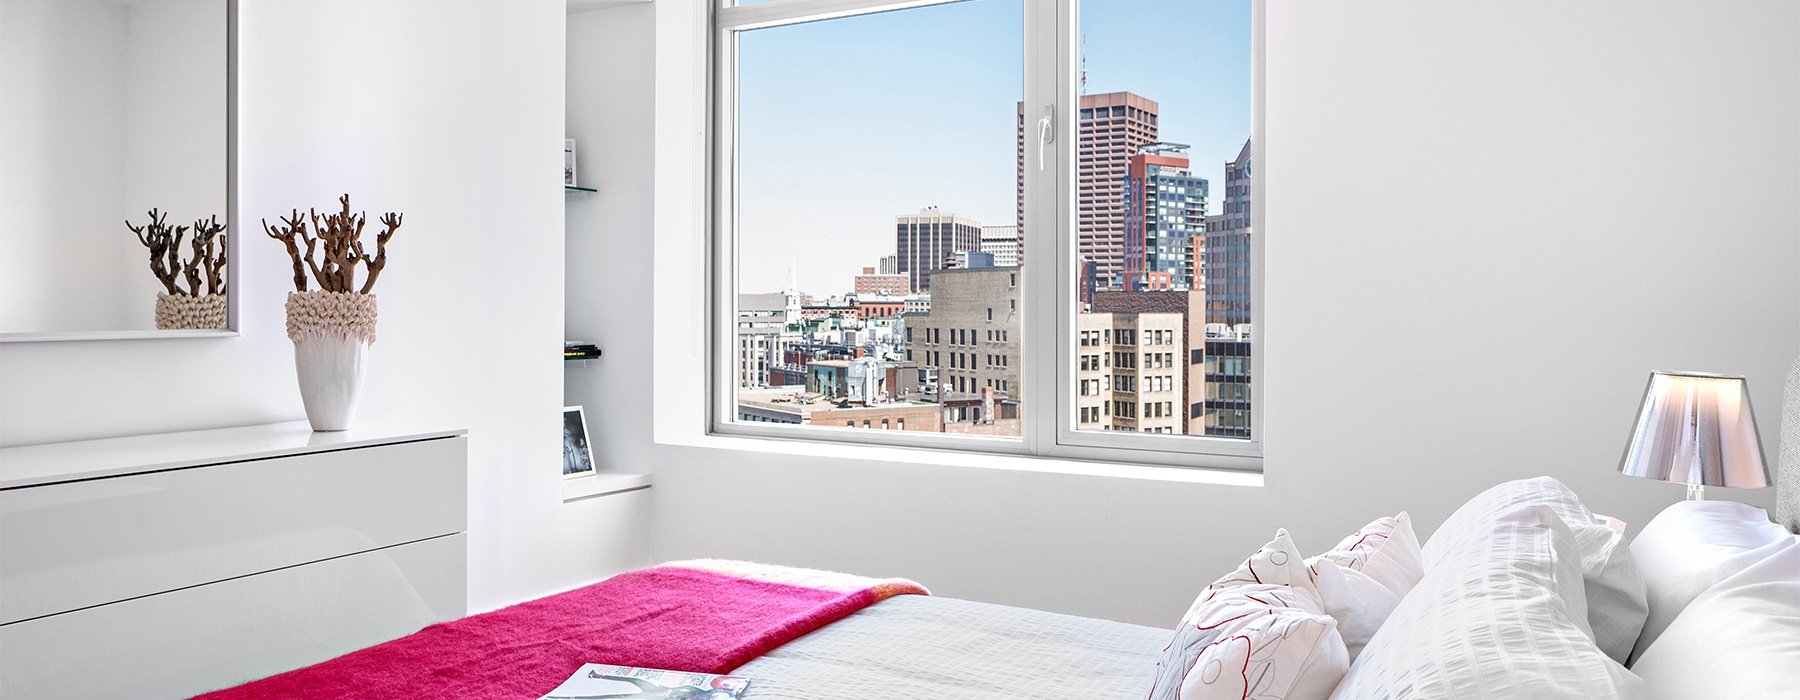 Bedroom with view of cityscape outside window